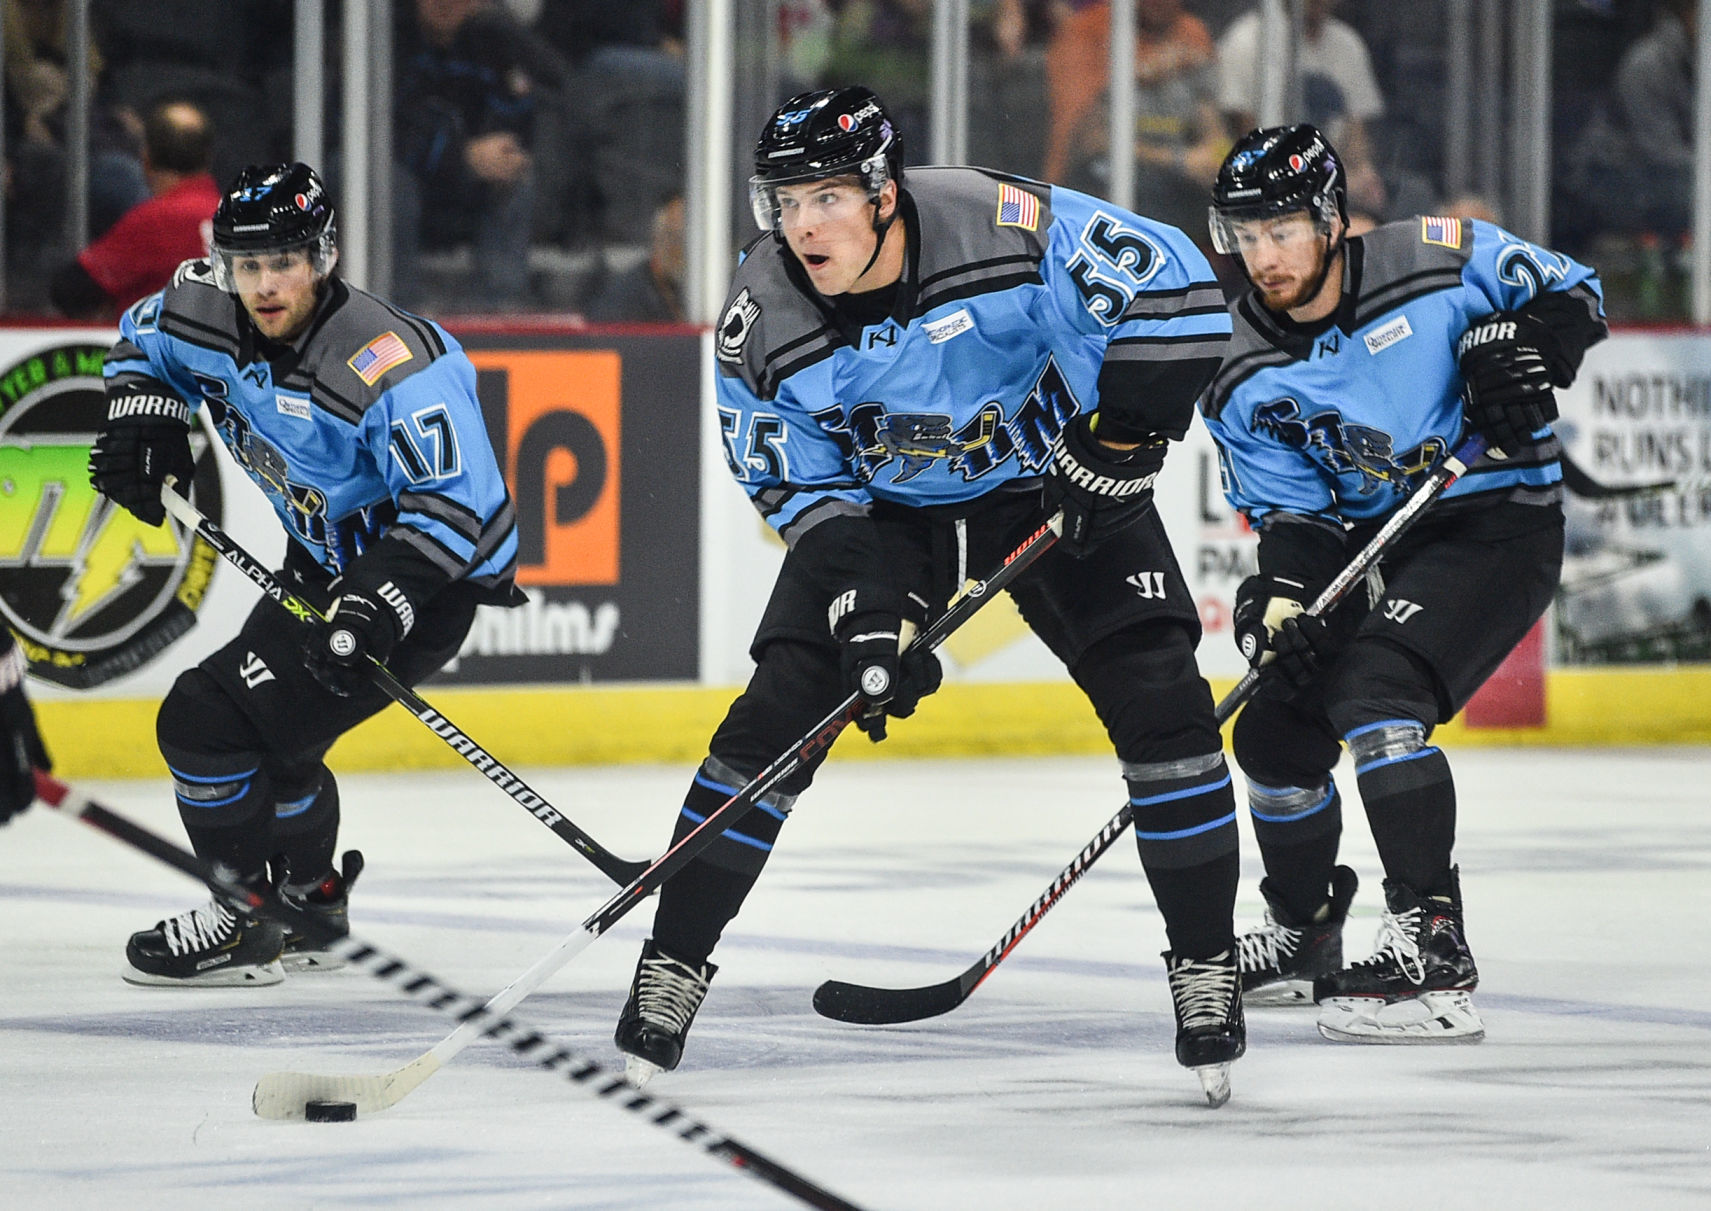 Storm take down defending champs in shootout